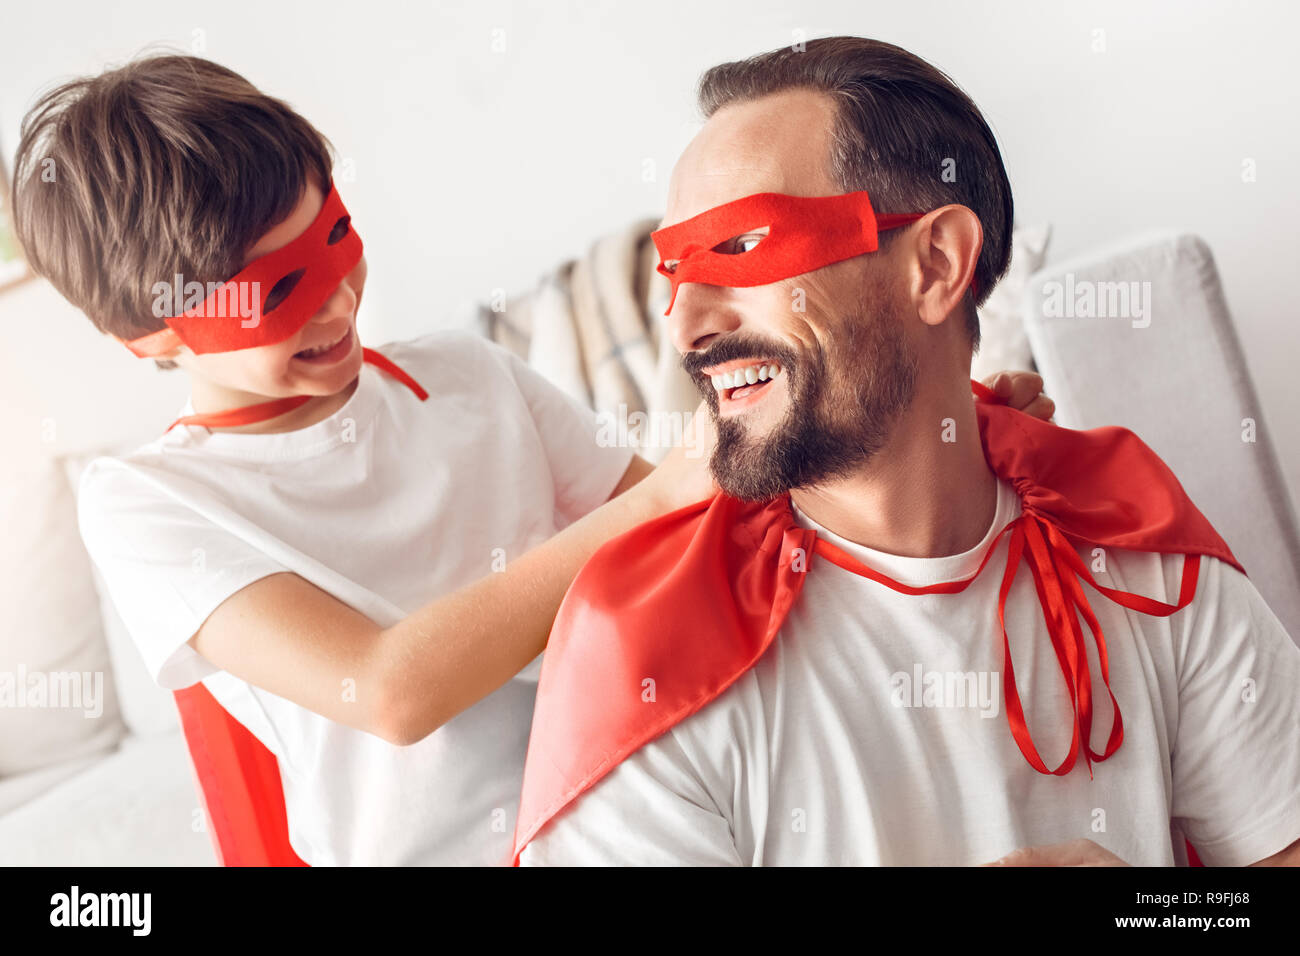 Father and little son wearing superheroe costumes together at home boy helping man to tie mask smiling cheerful close-up Stock Photo